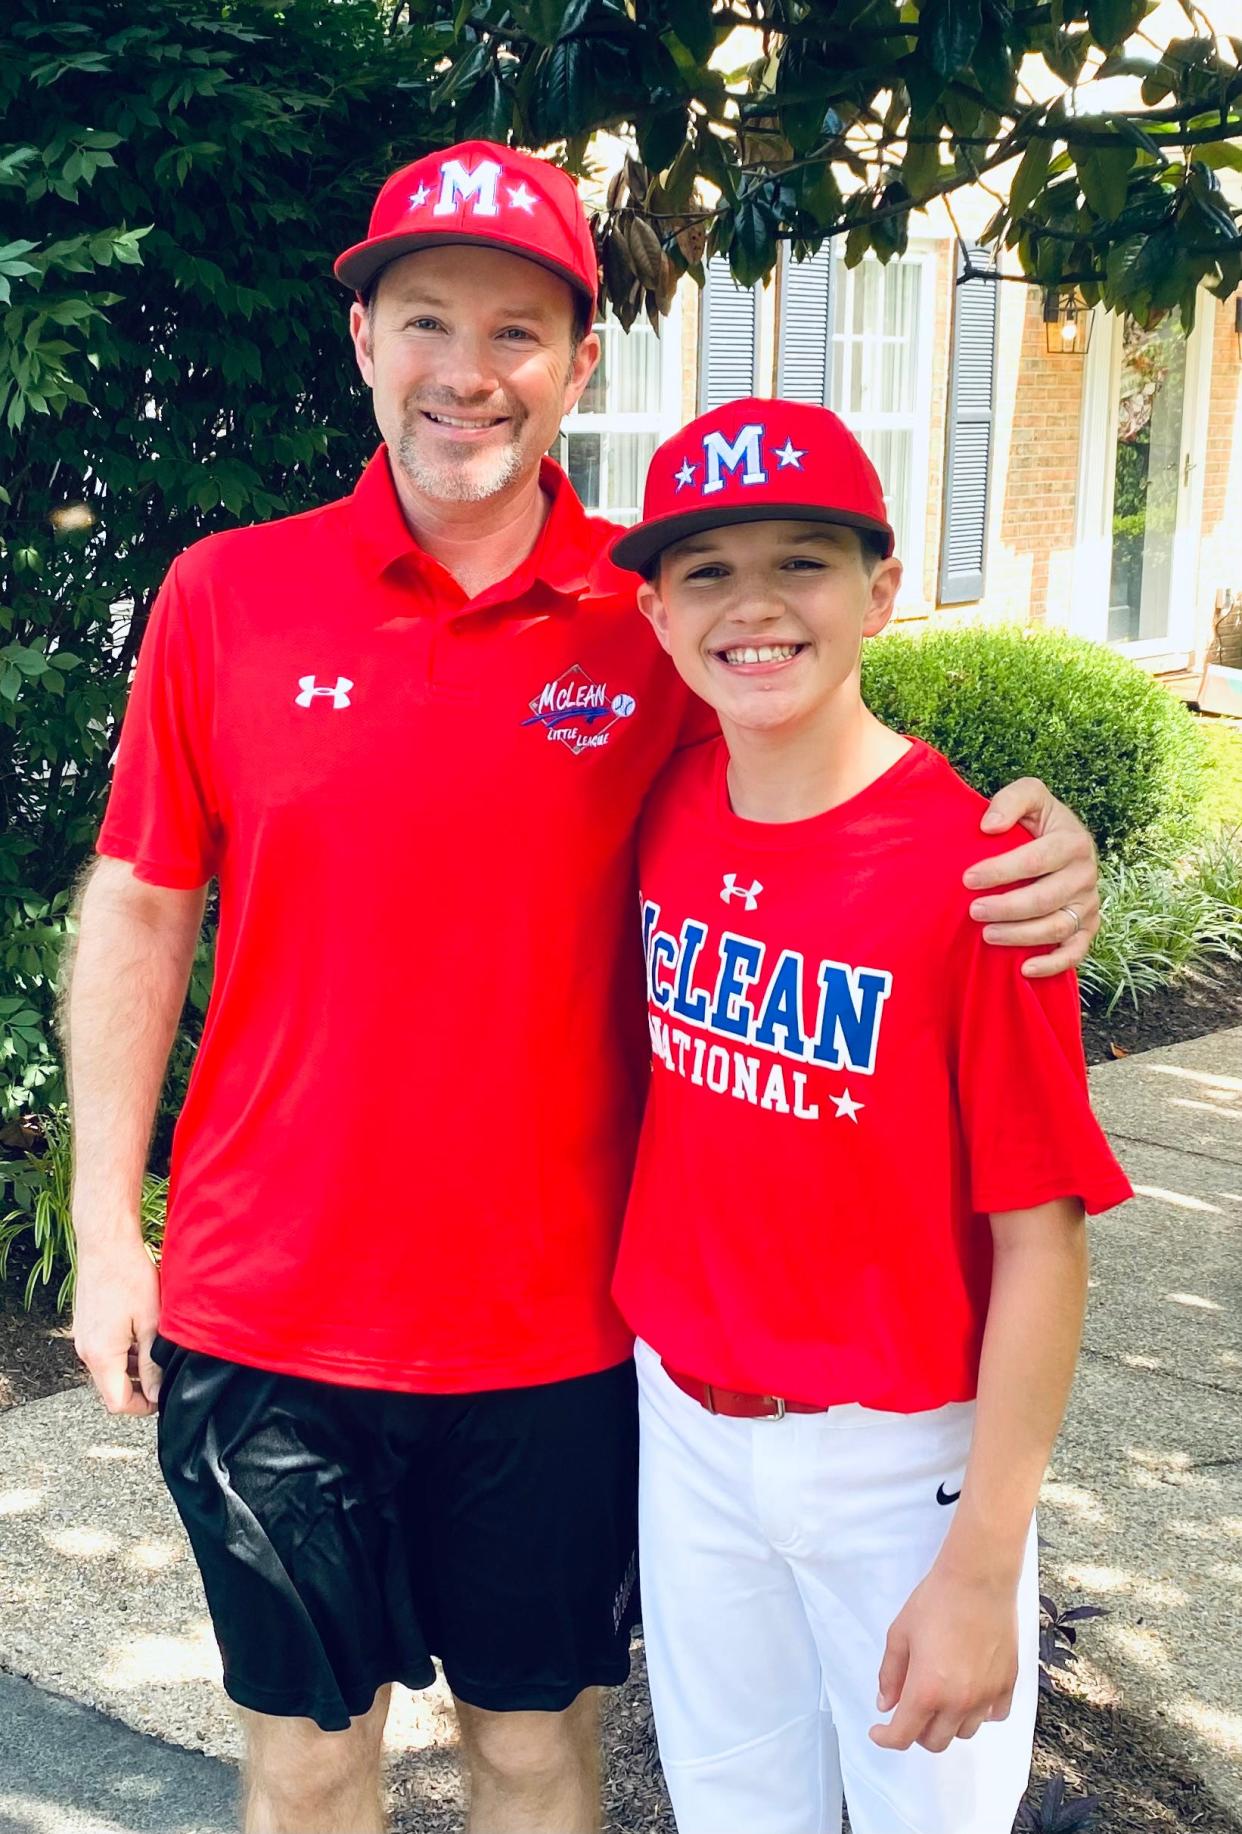 Steve Borelli coached his son, Liam, in Little League All-Stars in 2022. But he also once left Liam off a fourth-grade All-Star basketball team because he felt other players were more deserving. He says both experiences can be important. Photo by Colleen Borelli